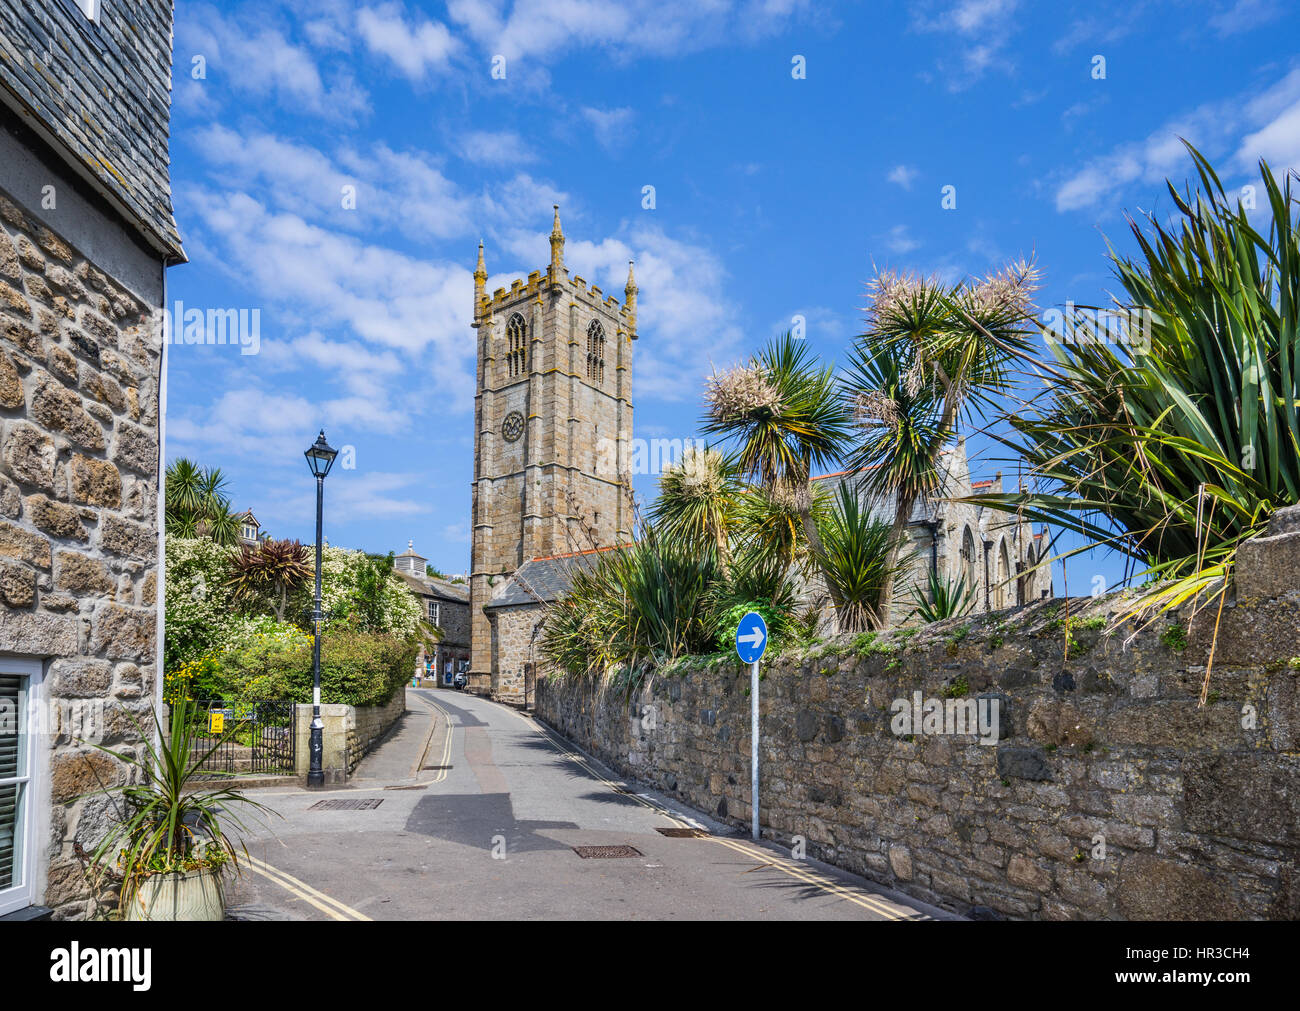 United Kingdom, Cornwall, St Ives, 15th century St Ives Parish Church is dedicated to the Saint Ia the Virgin Stock Photo